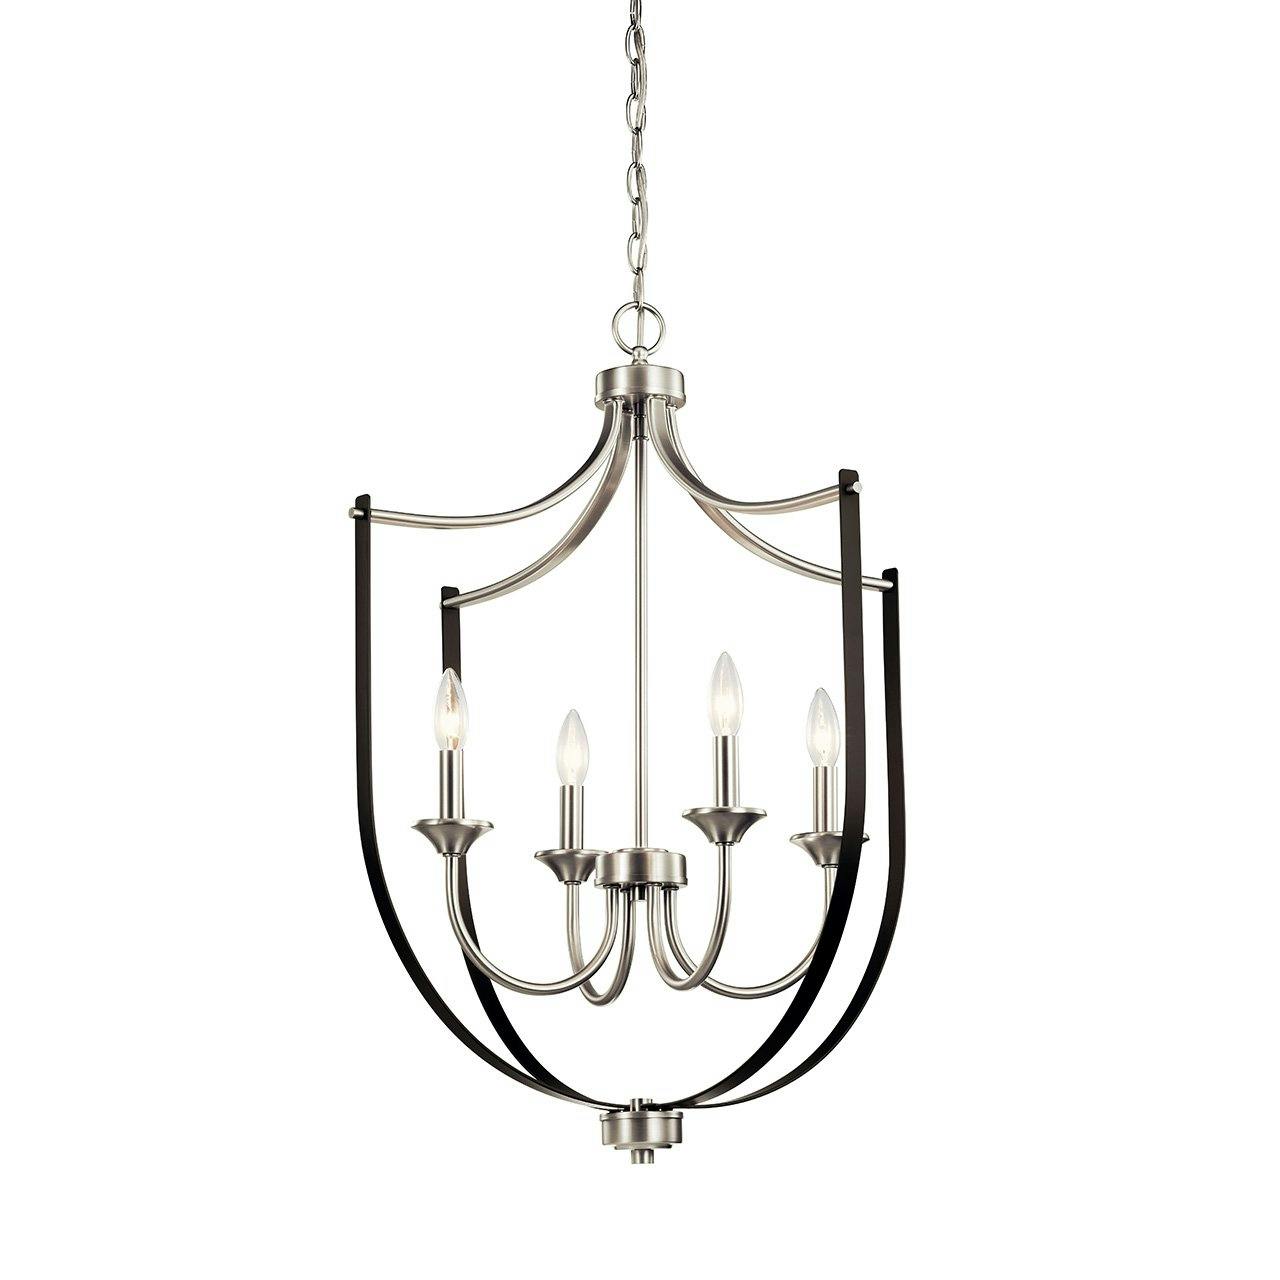 Tula 4 Light Foyer Chandelier Nickel without the canopy on a white background